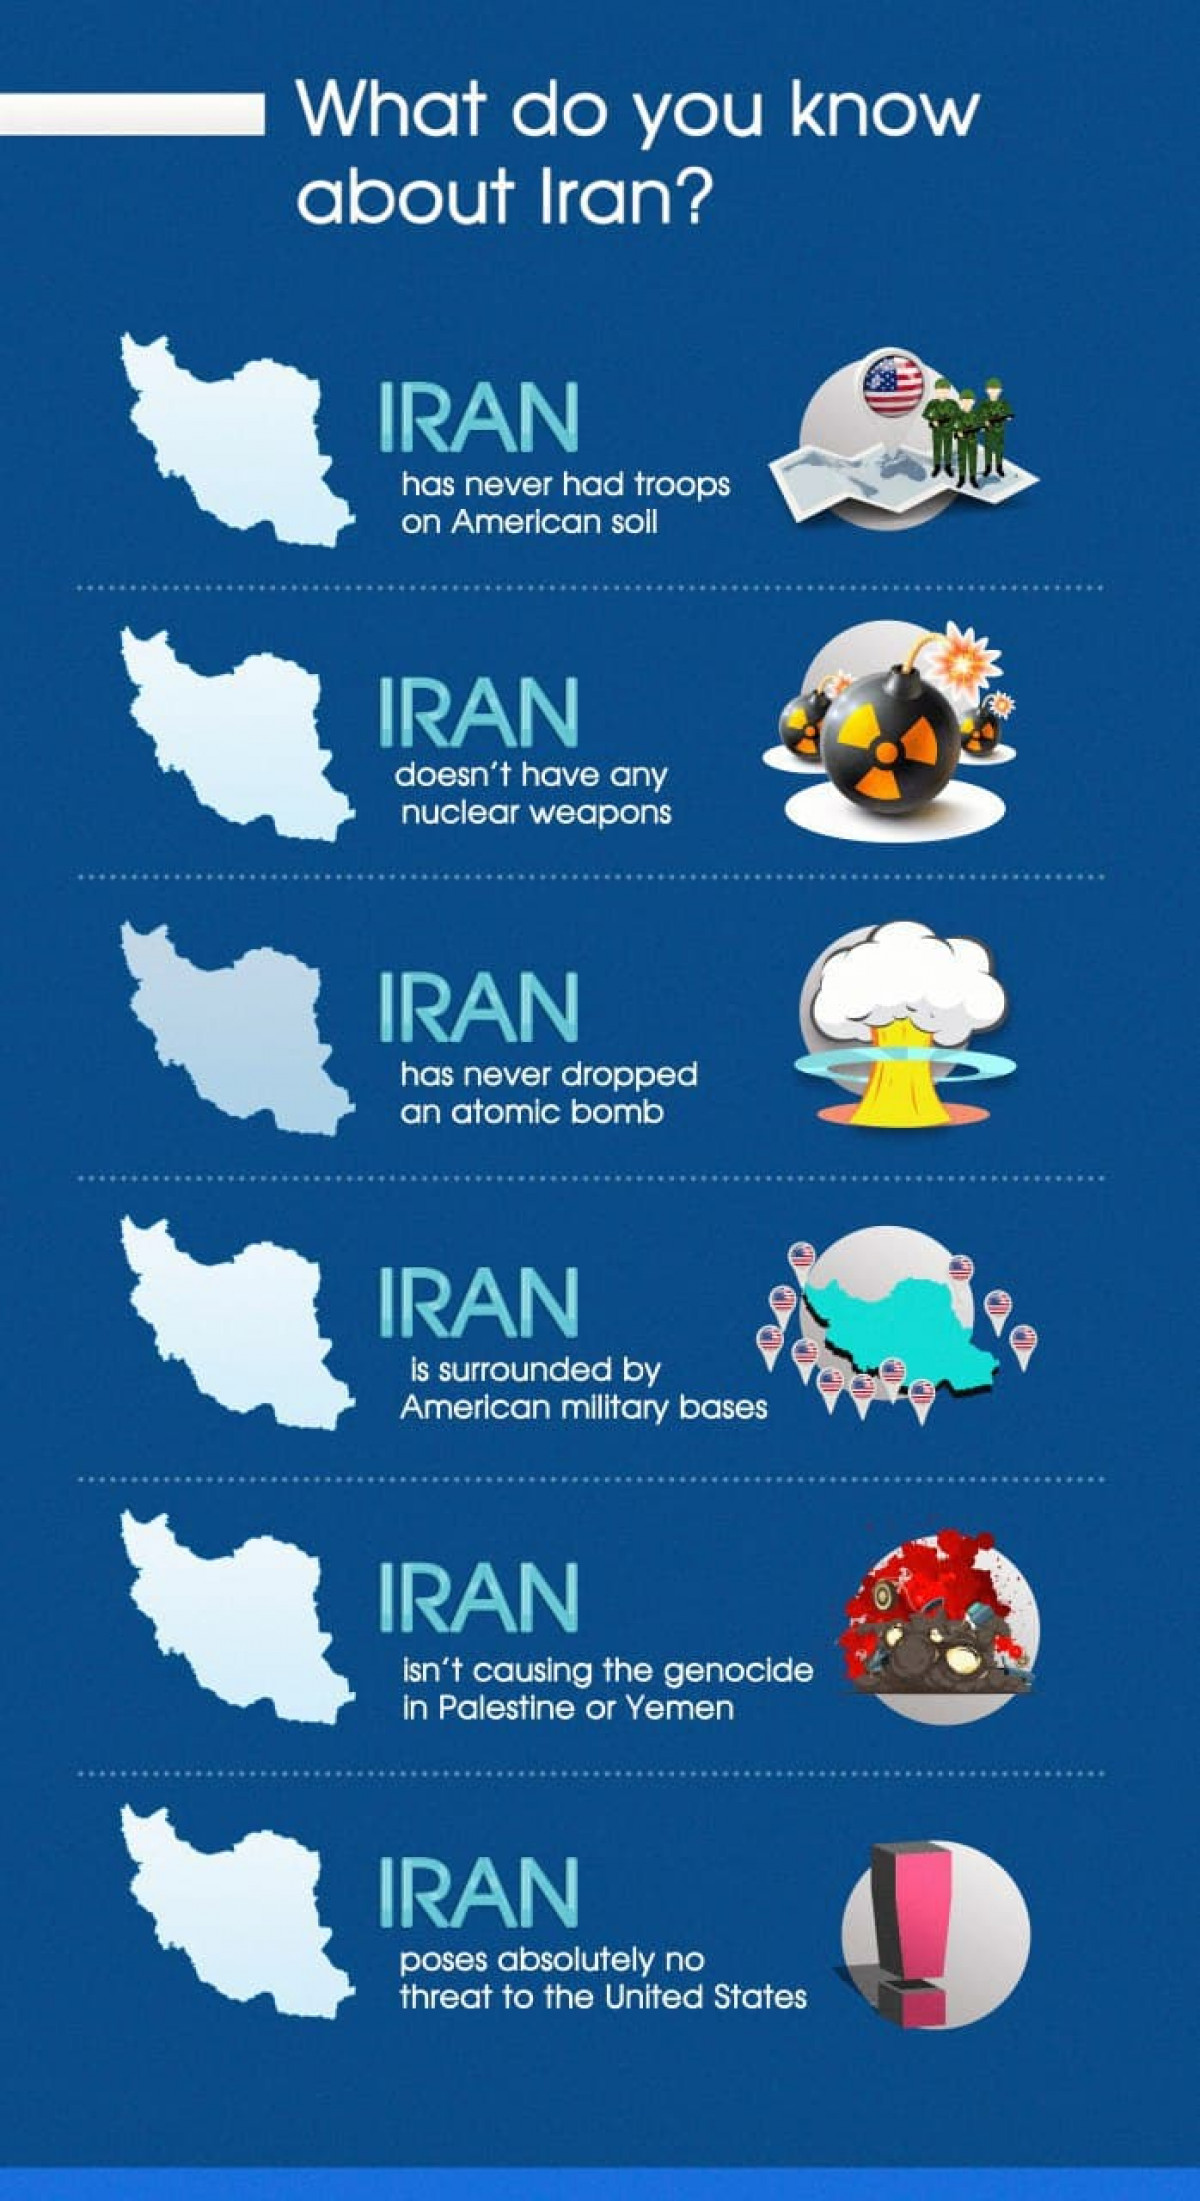 What do you know about Iran?